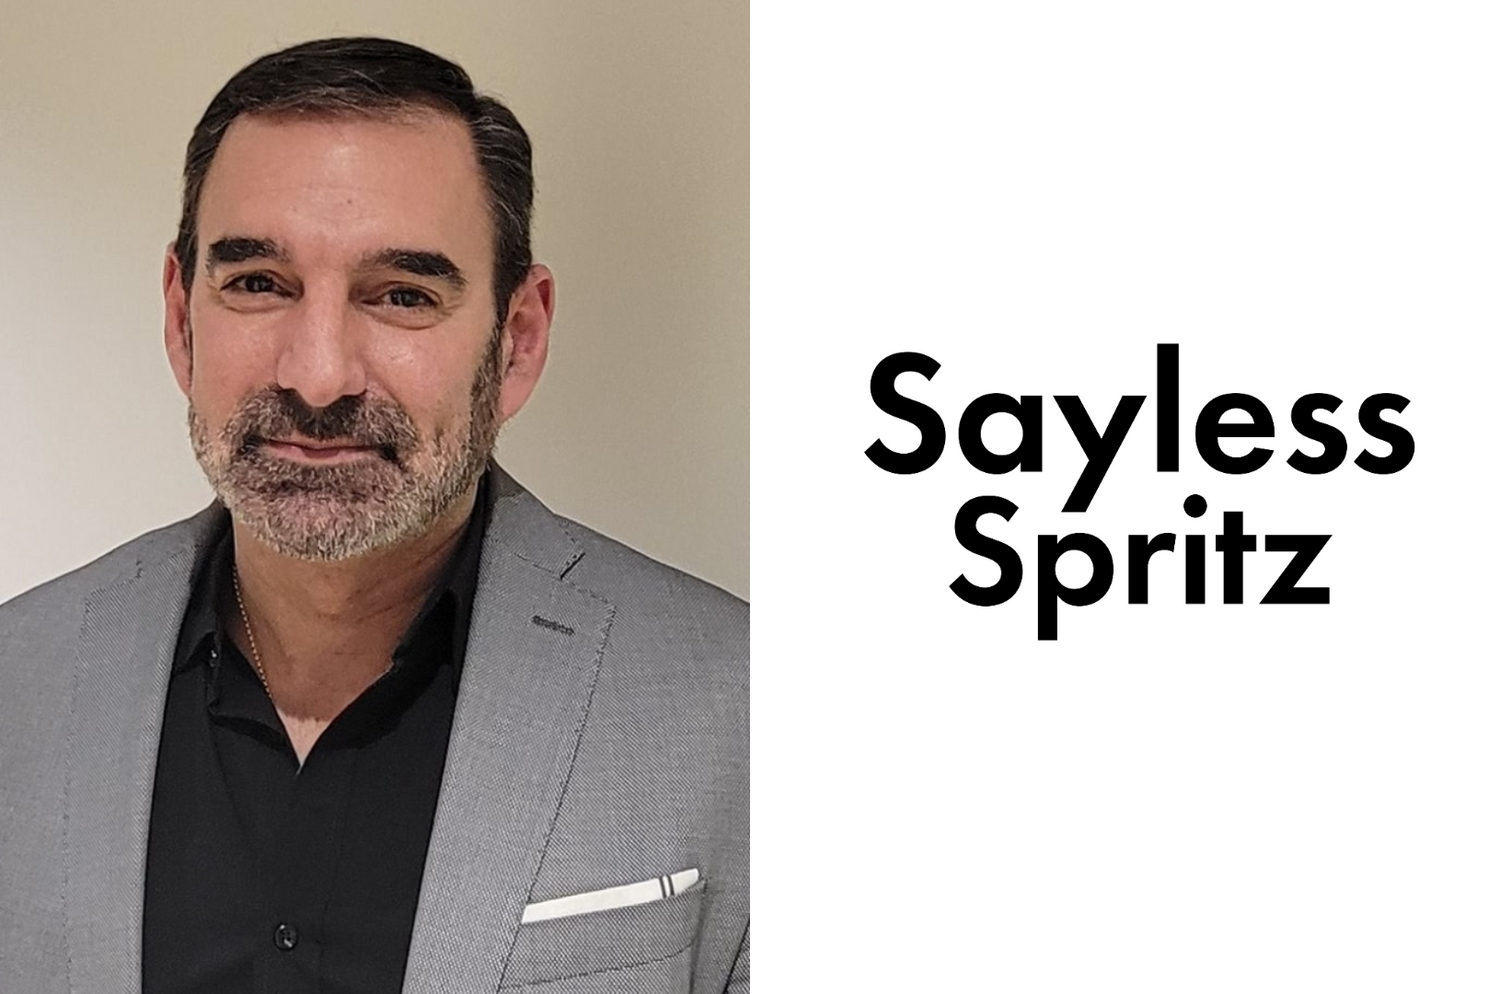 Paul Sorkin, CEO and Owner of Sayless